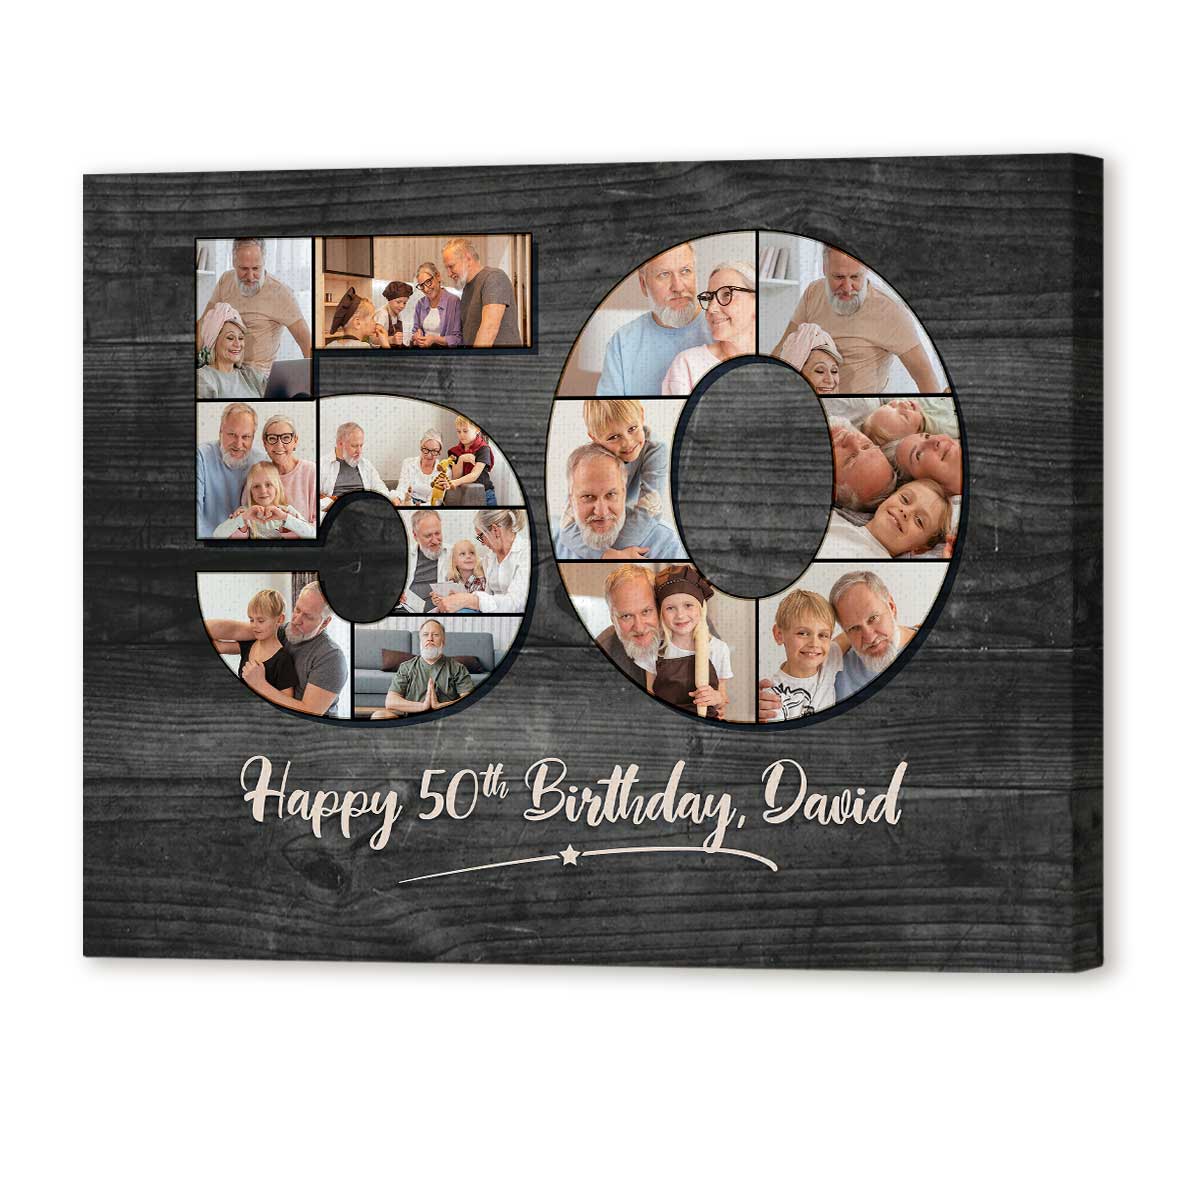 28 Best 50th Birthday Gift Ideas For Women | Unique 50th birthday gifts, 50th  birthday gifts for woman, 50th birthday gifts